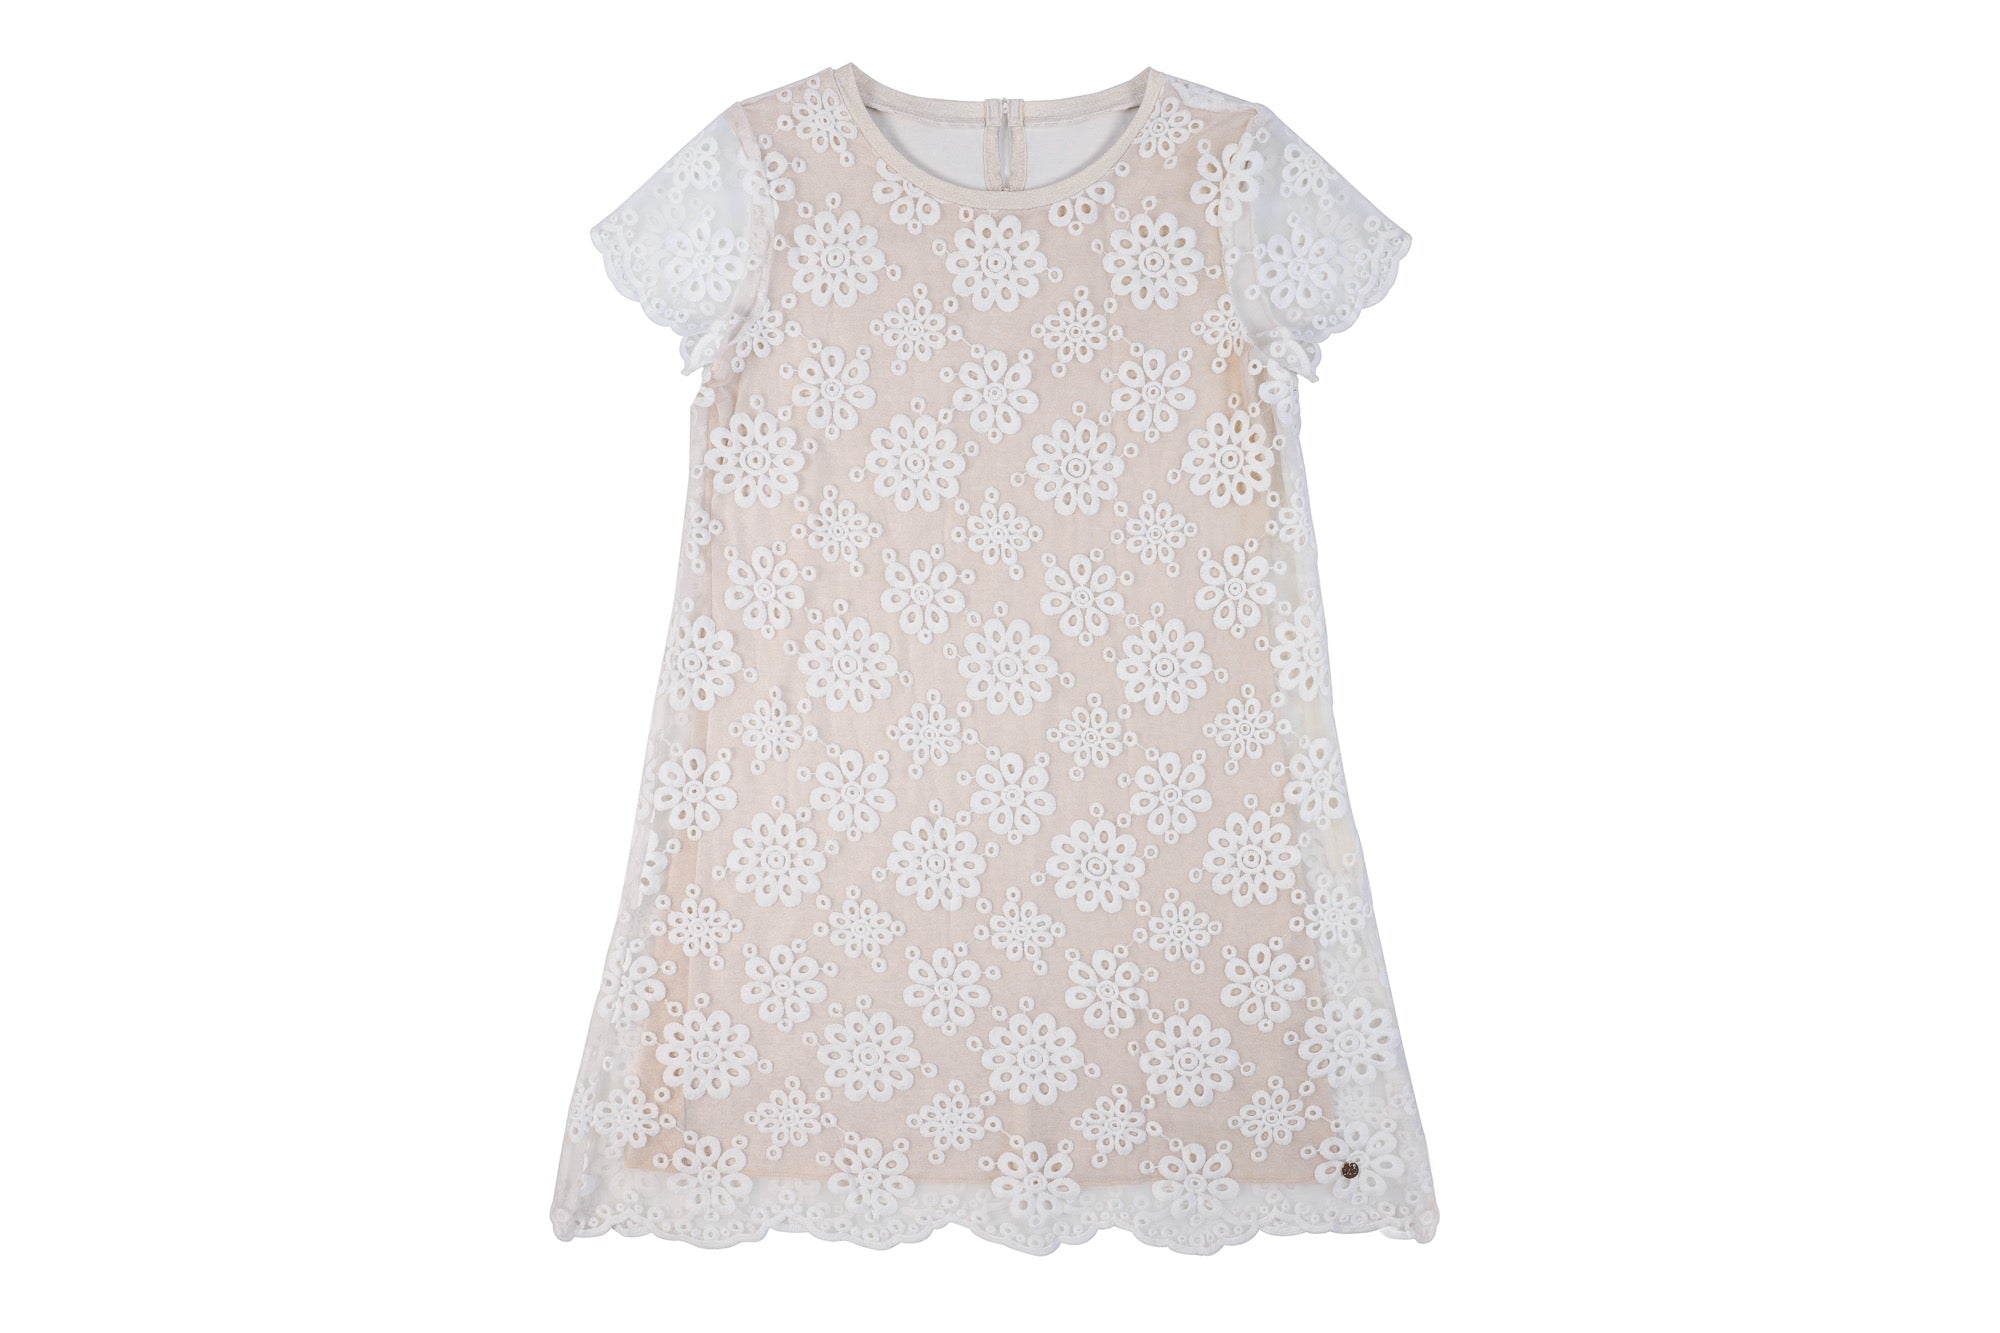 Miss Grant girls mini dress guipure lace in white with crochet floral design